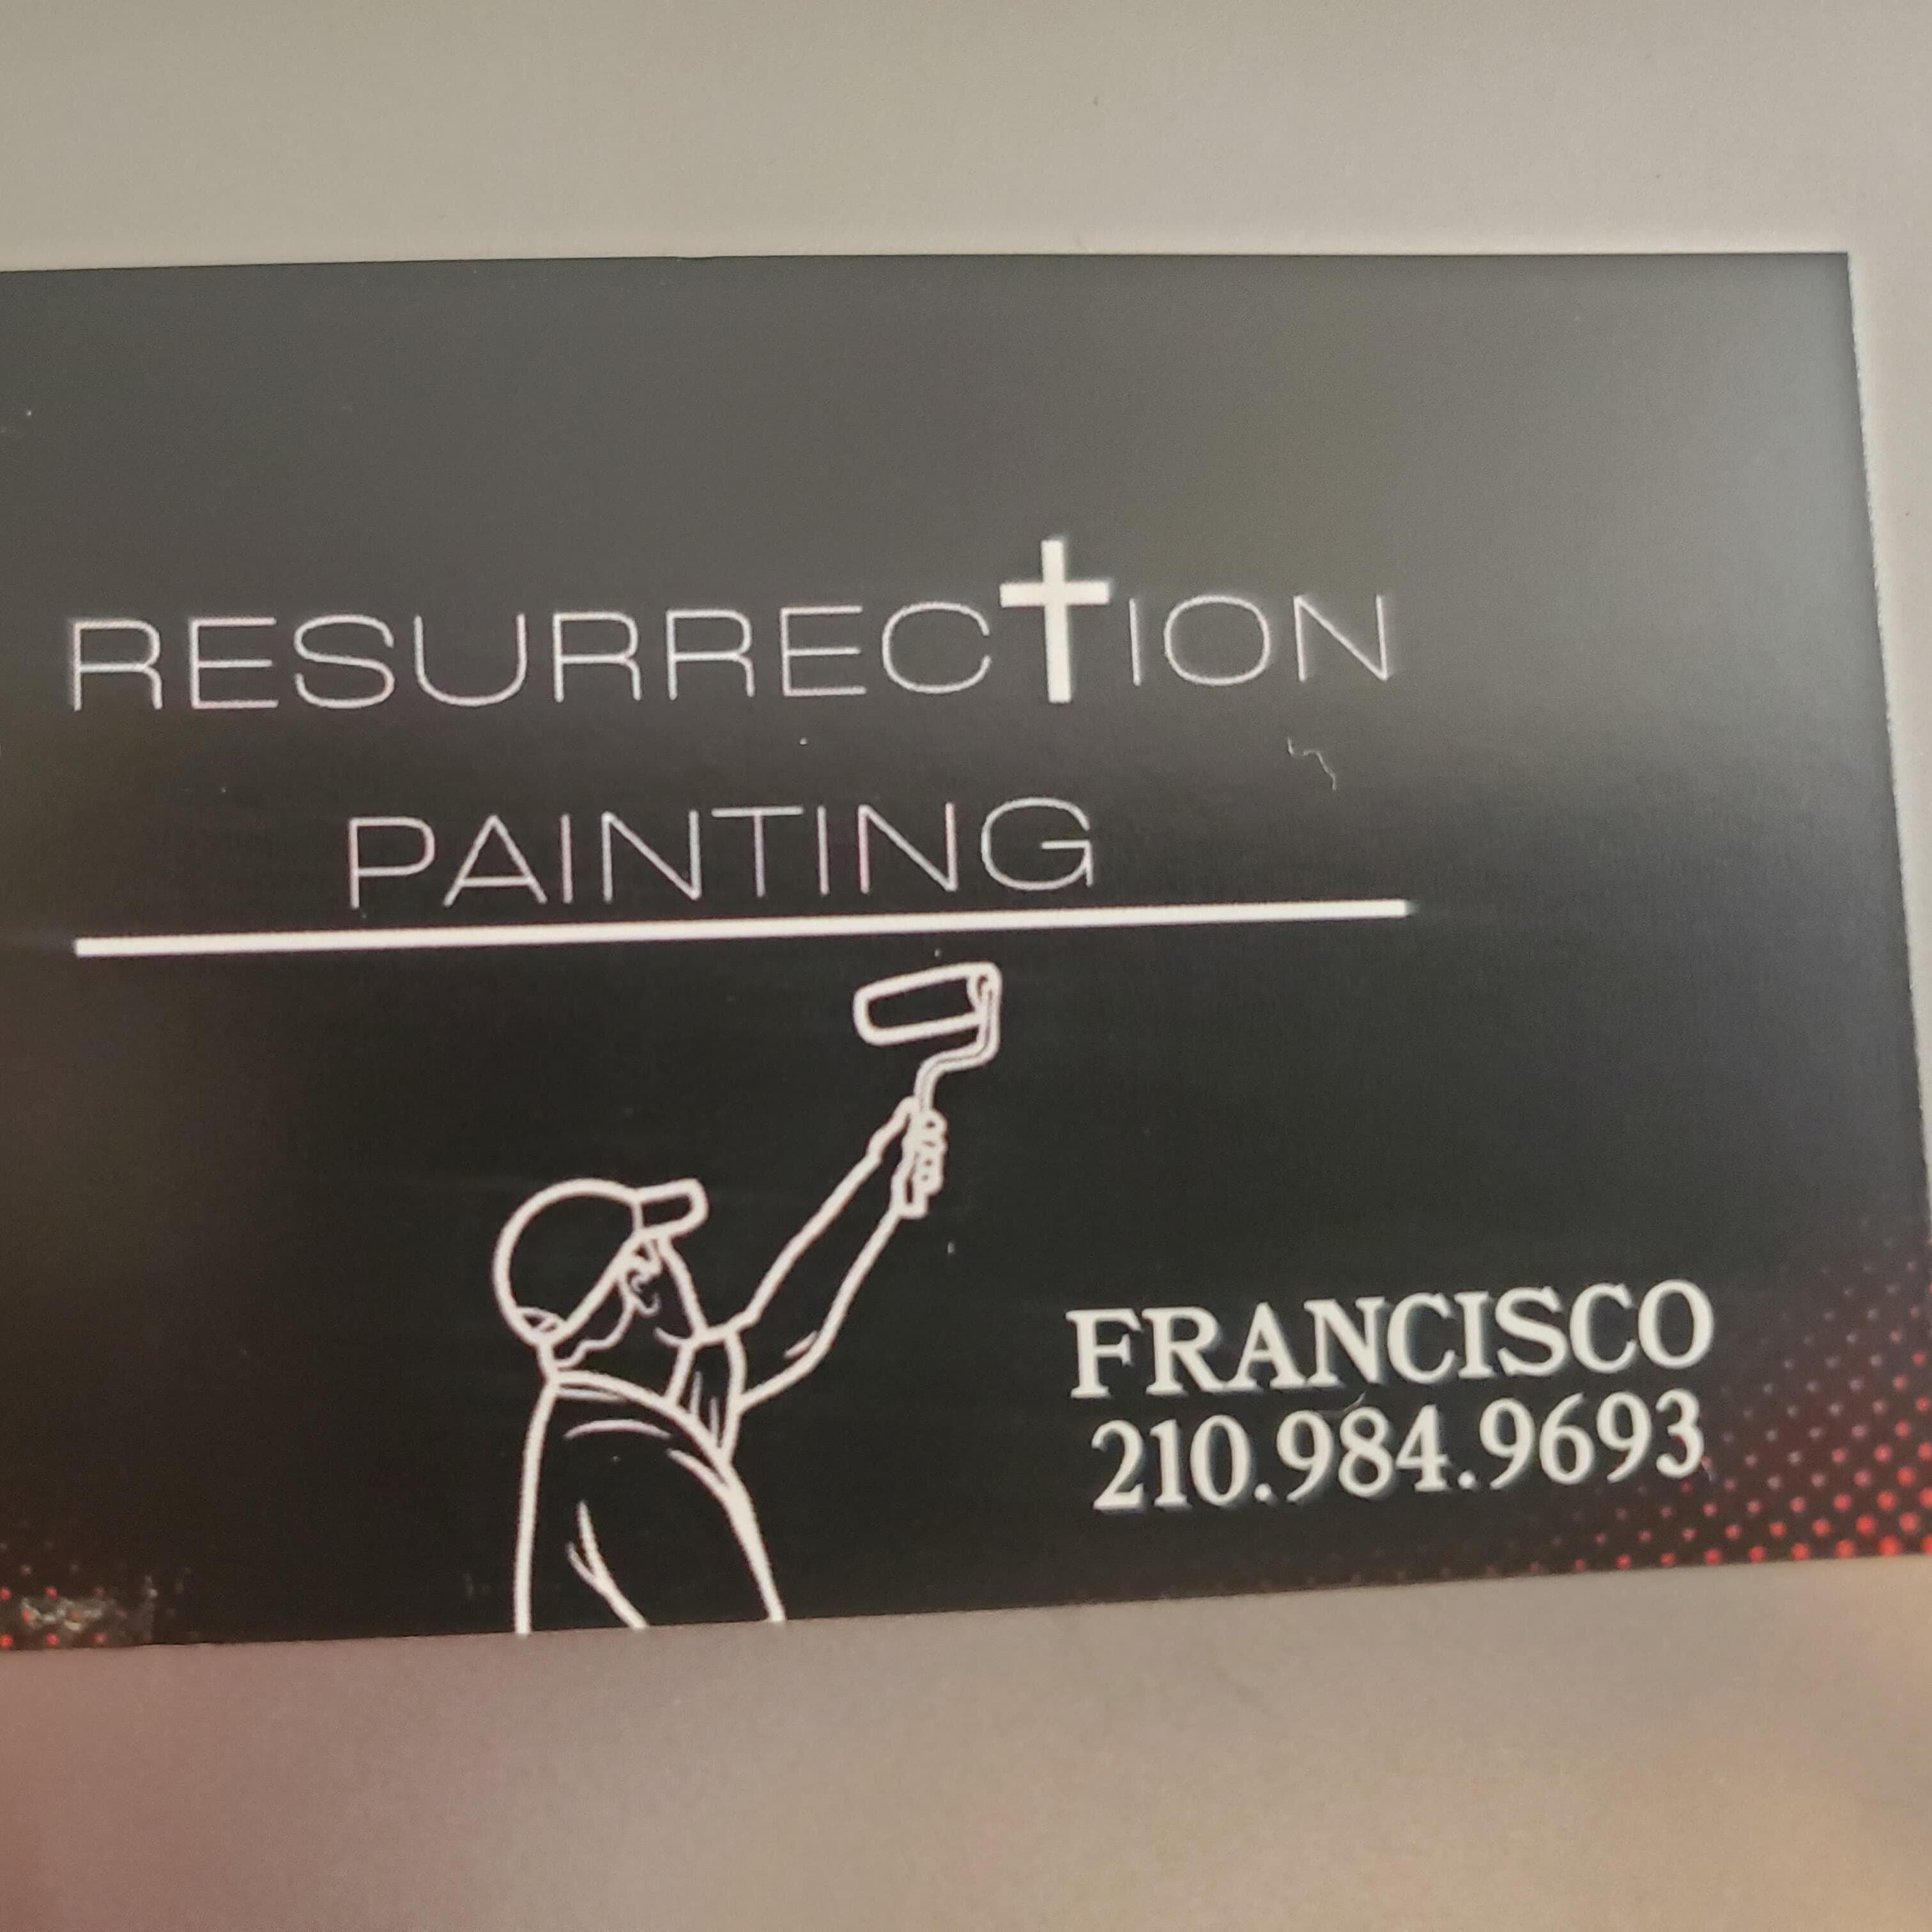 San Antonio Painter - Quality Painting Services - Expertly Transform Your Home!